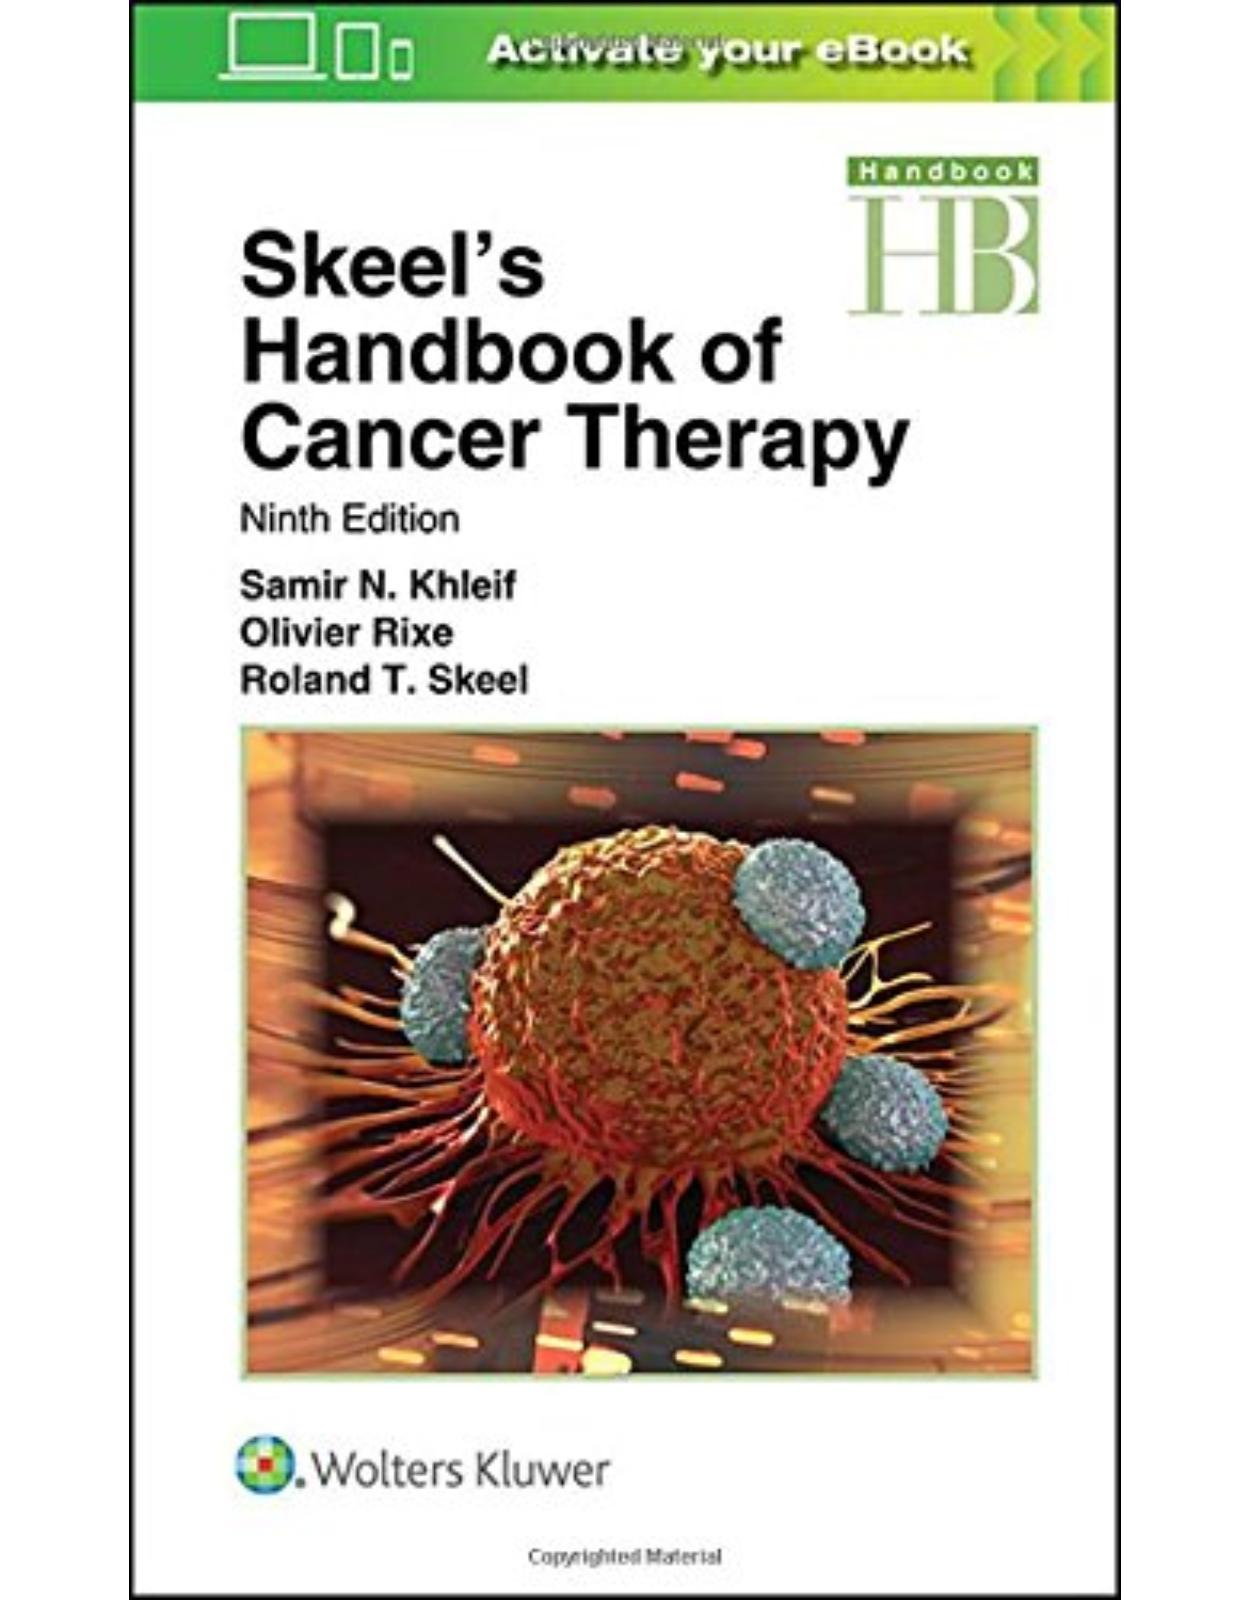 Skeel's Handbook of Cancer Therapy, 9e 